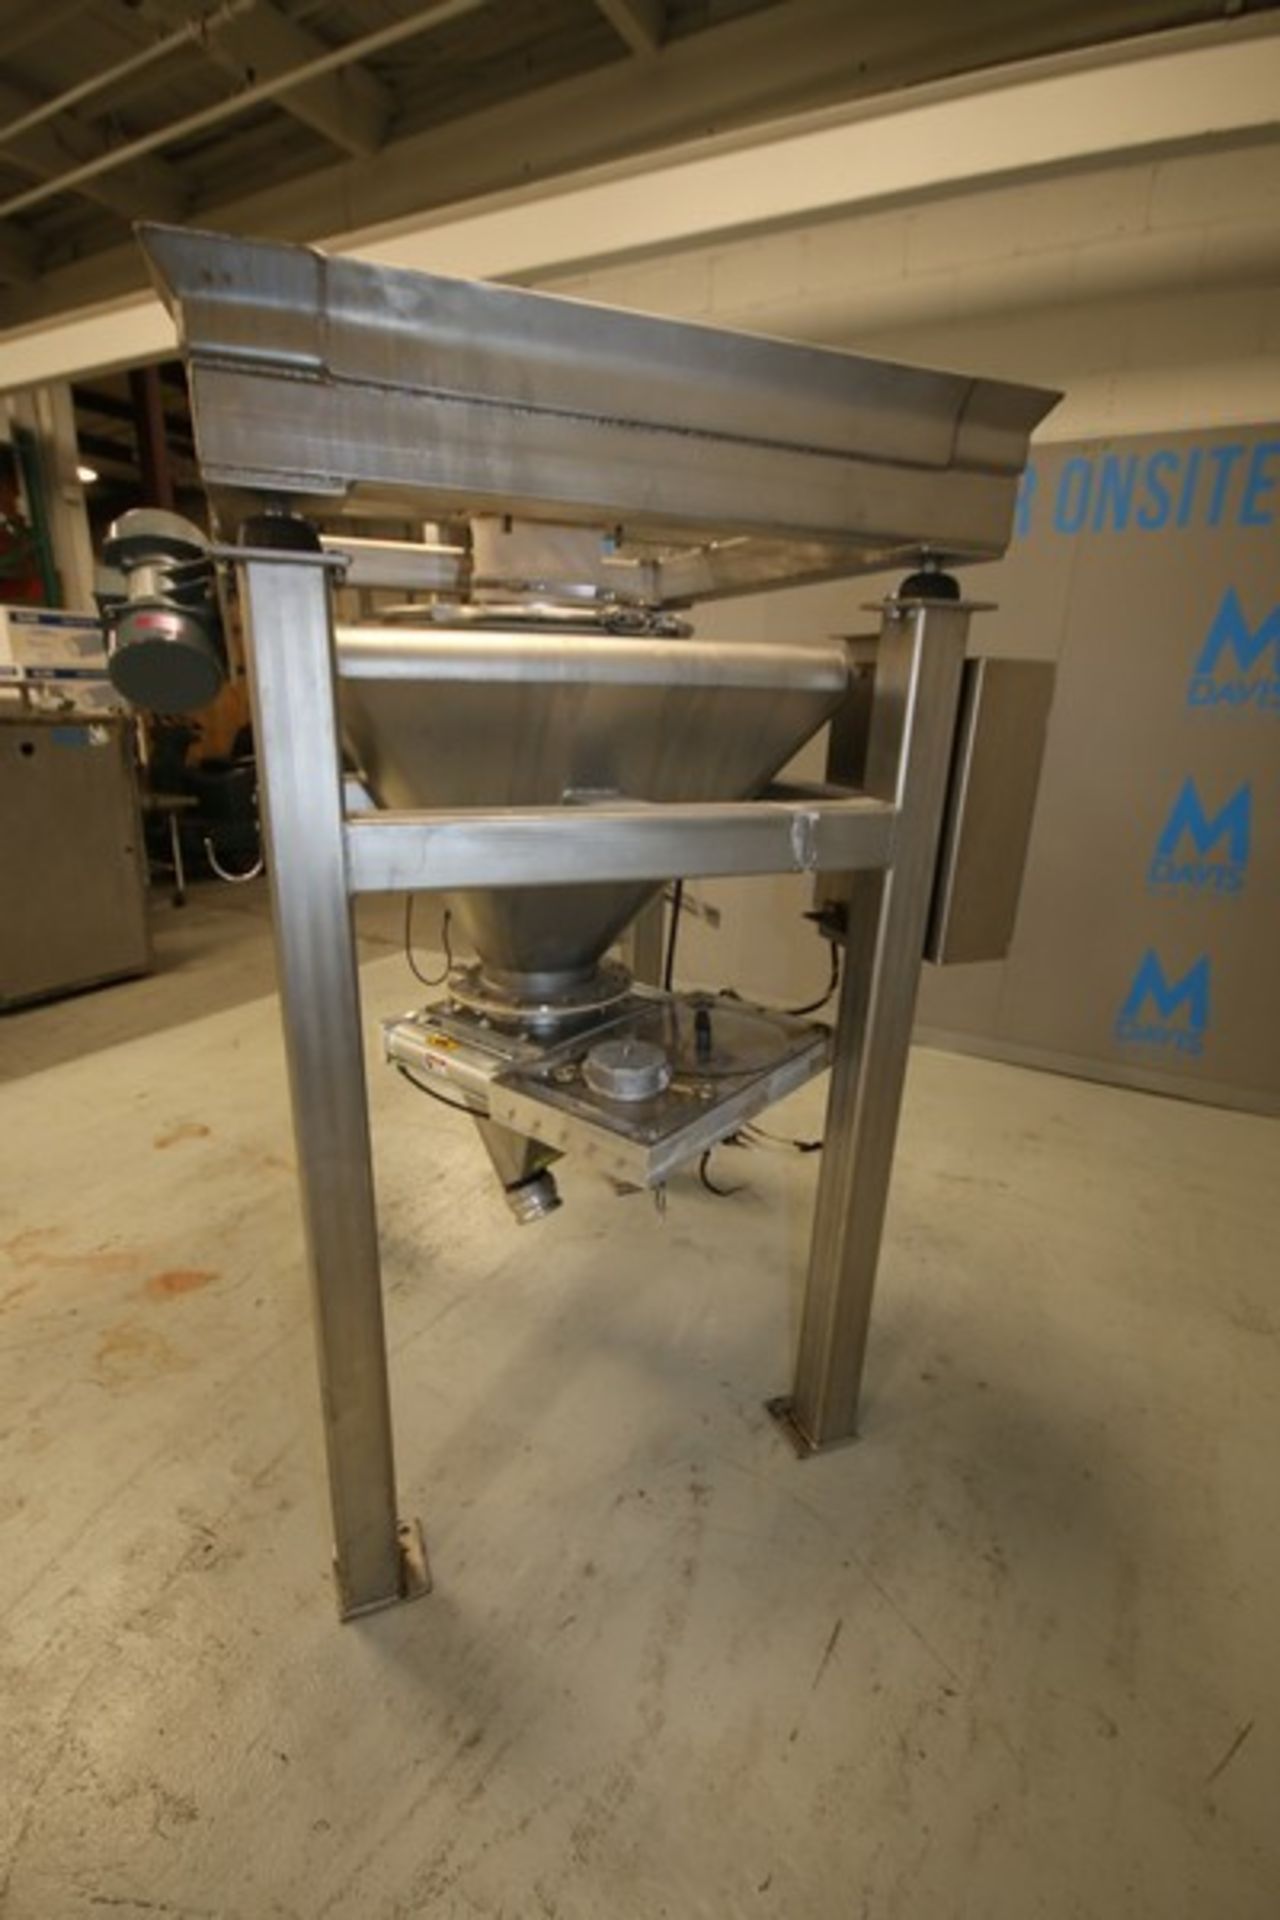 Metalcraft S/S Powder Hopper, Model 1144500,SN 44115-3, with 10" Top Connection with Pneumatic Power - Image 4 of 7